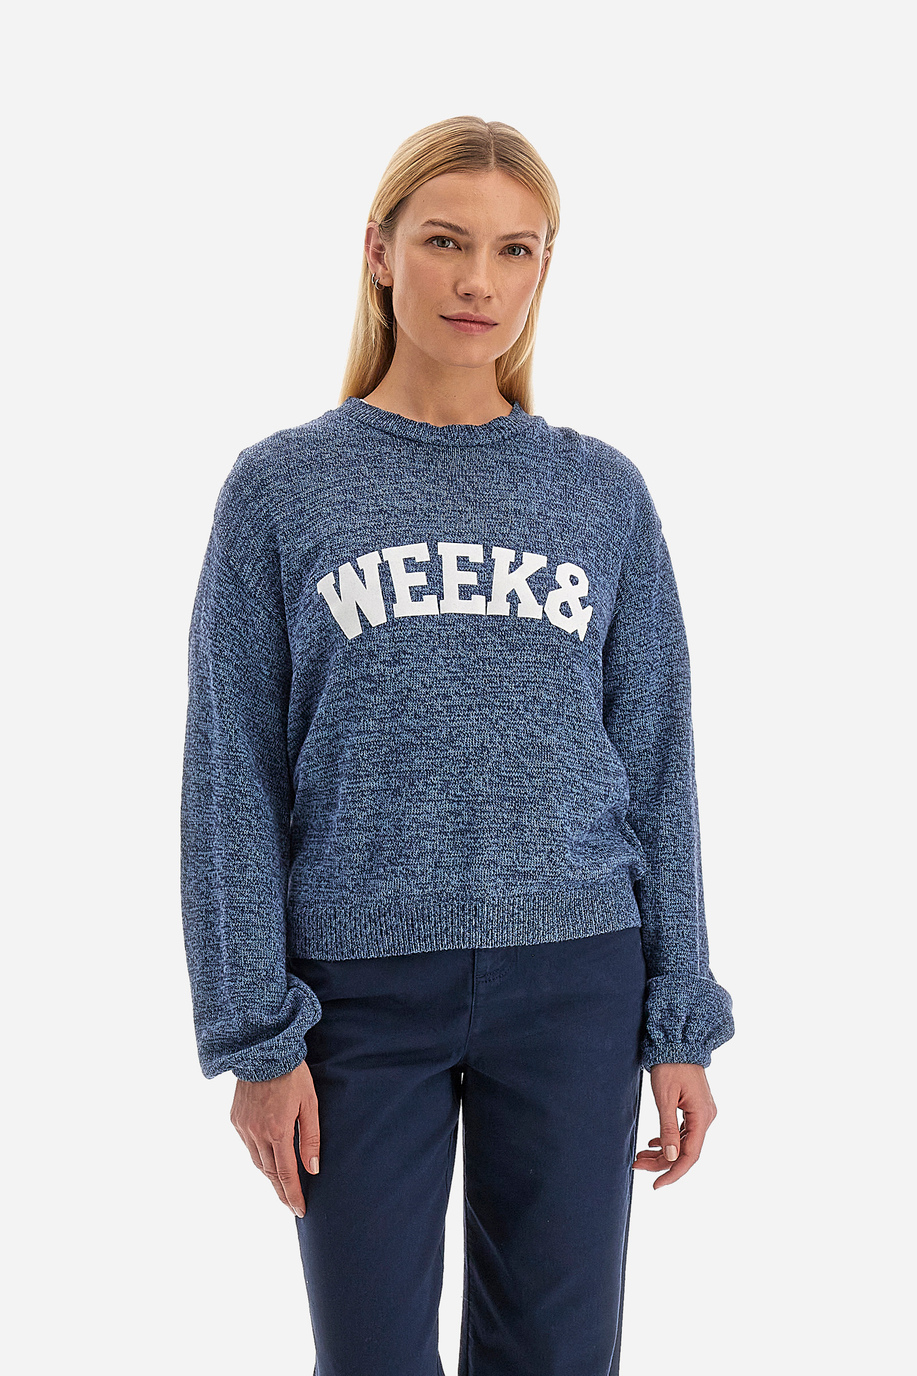 Women's round-neck long-sleeved sweater with Spring Weekend logo - Videl - Preview | La Martina - Official Online Shop